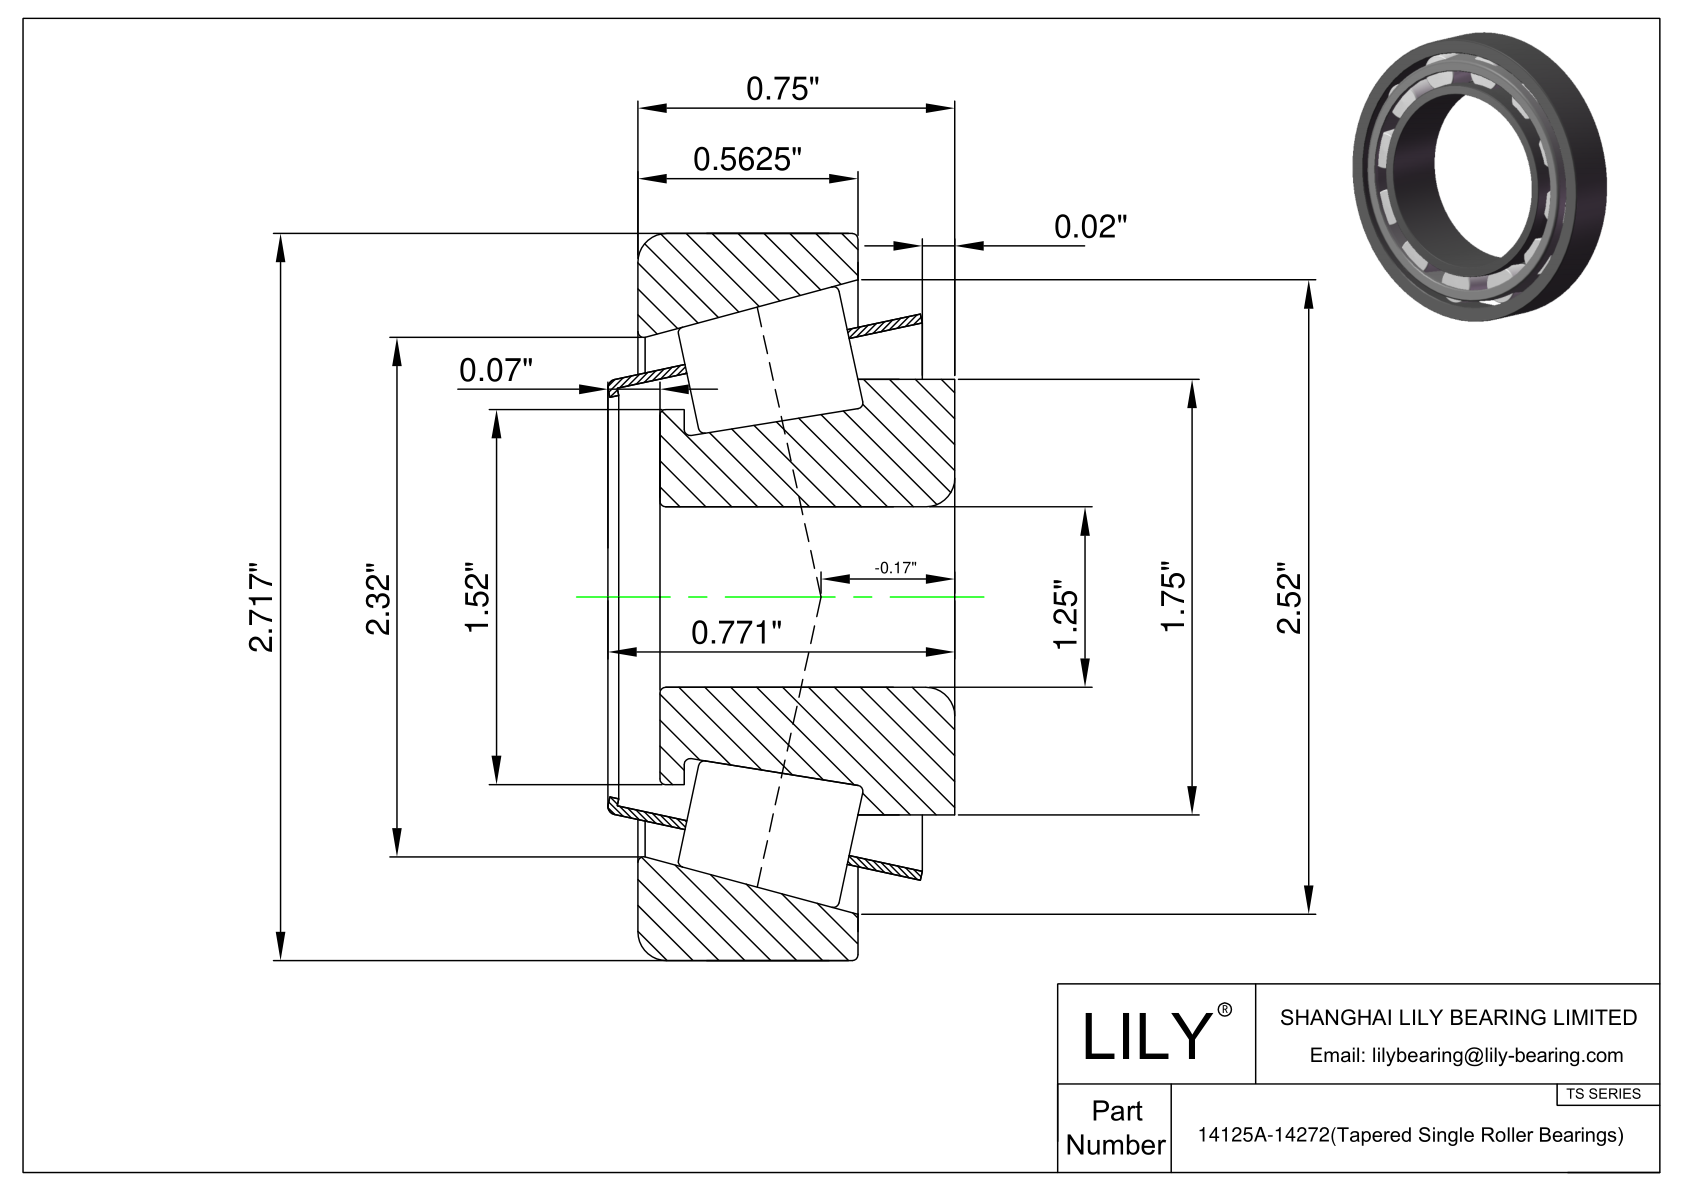 14125A-14272 TS (Tapered Single Roller Bearings) (Imperial) cad drawing